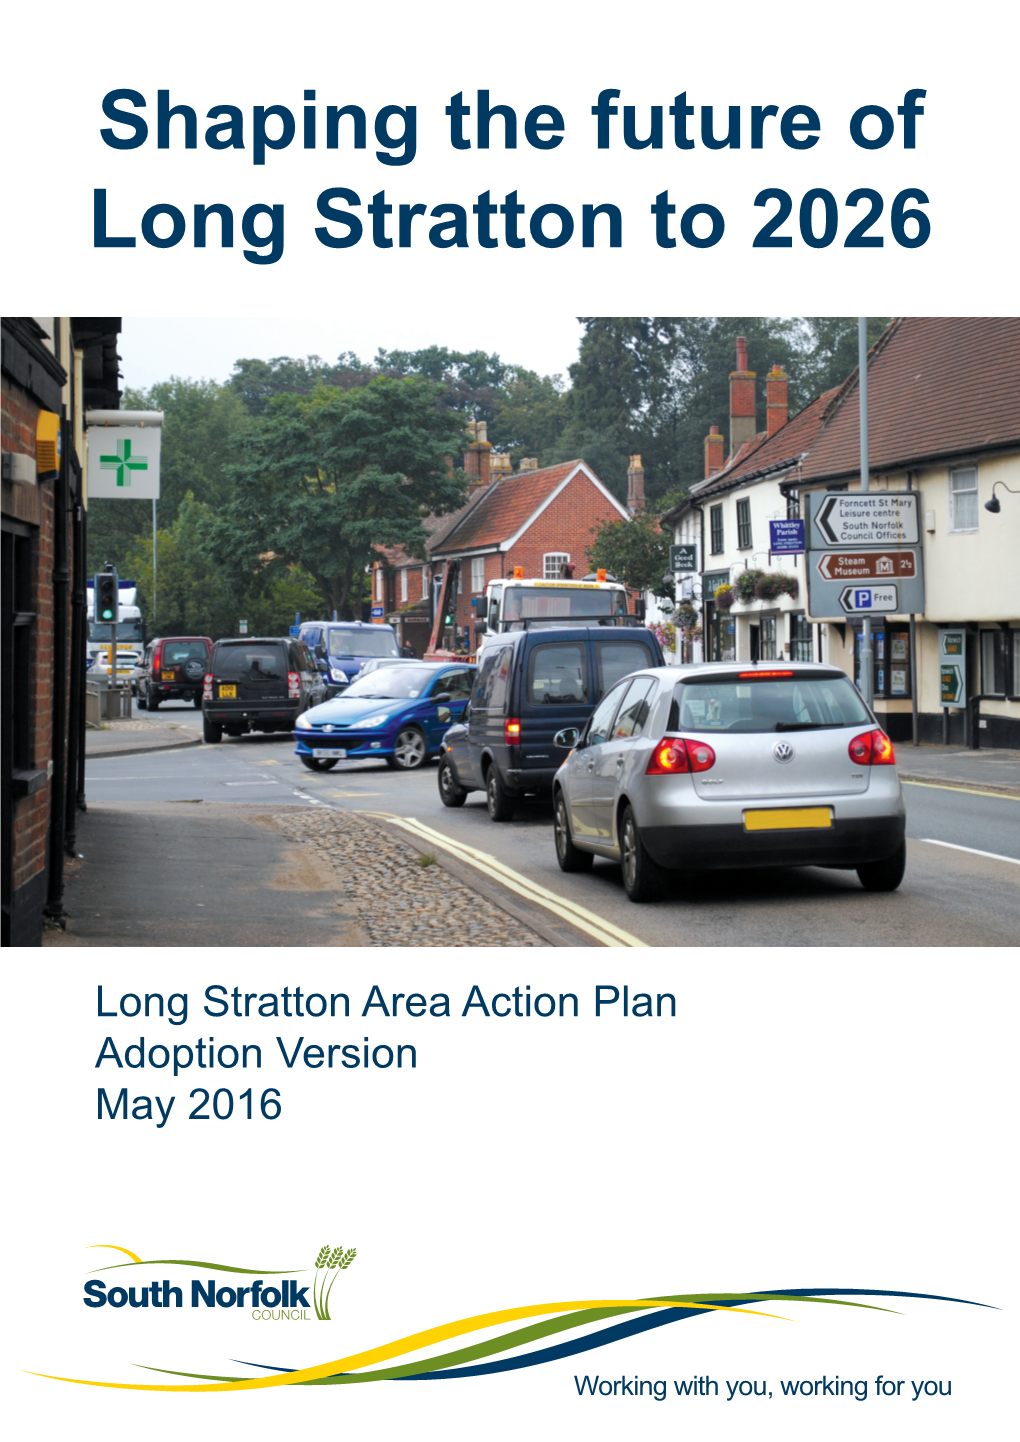 Long Stratton Area Action Plan Adoption Version May 2016